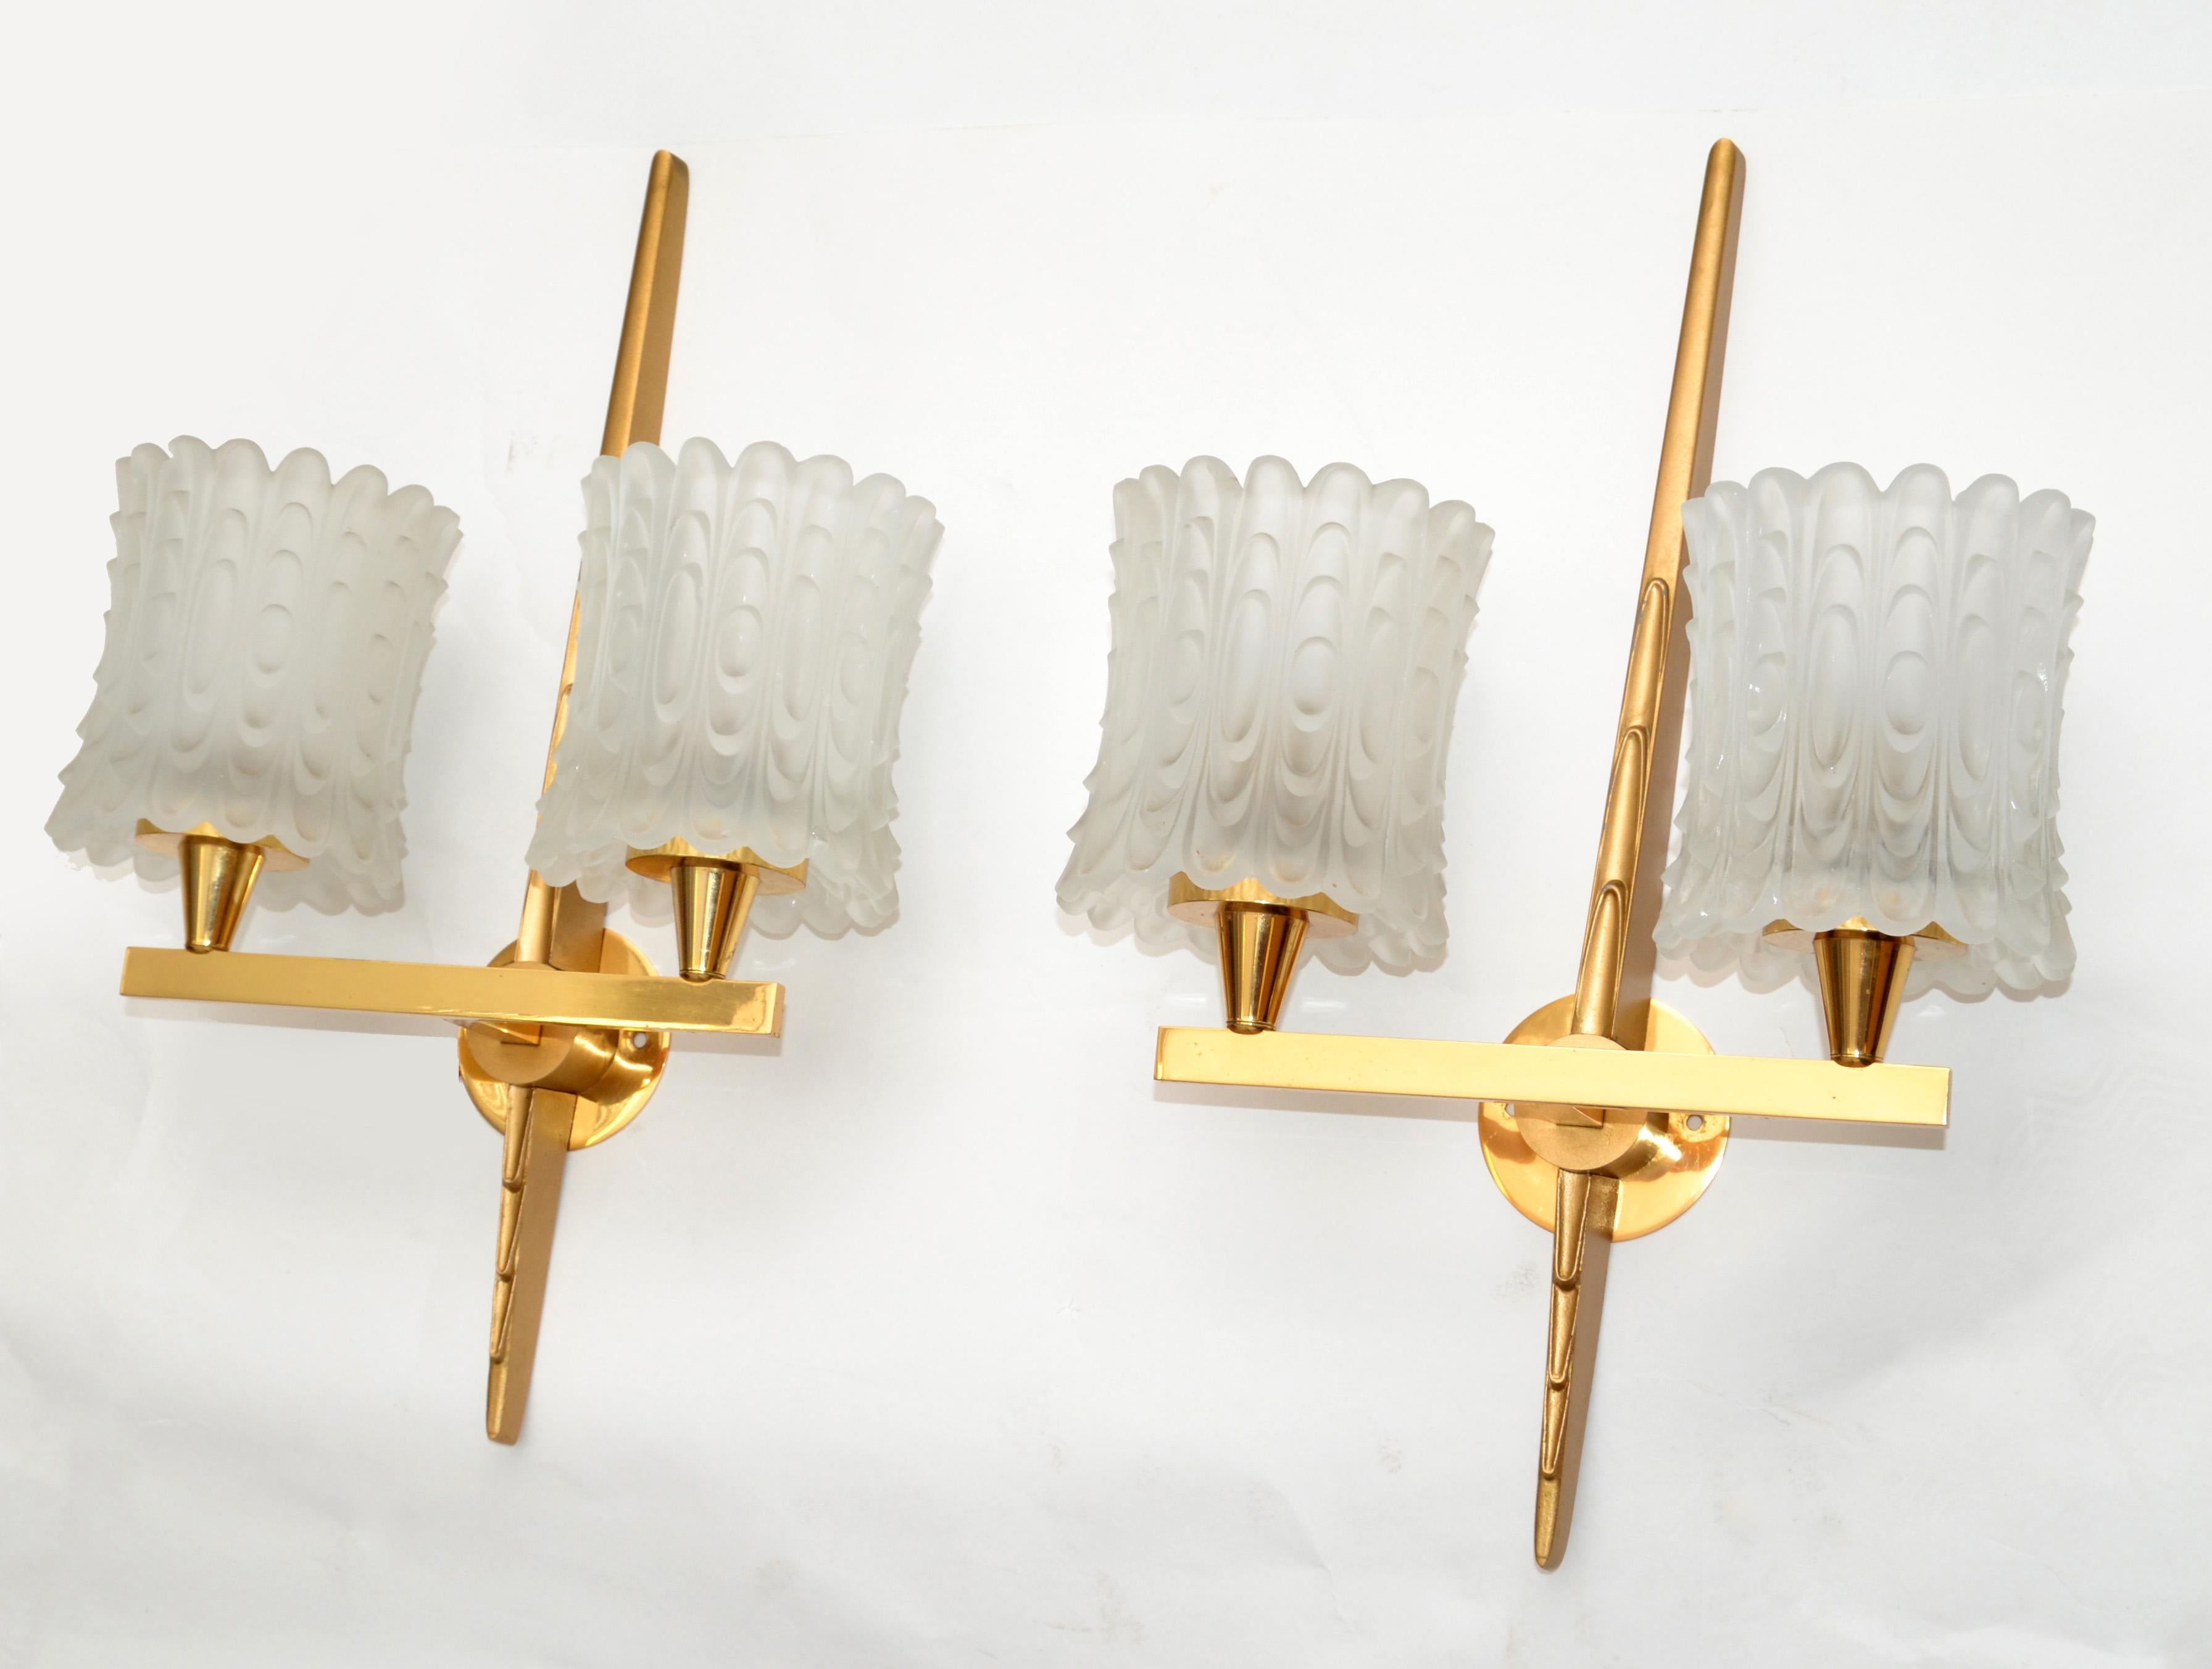 Art Deco impressive pair of Maison Arlus double brass & textured glass shade sconces.
In perfect working condition two lights per sconce, max 60 watts per socket.
Heavy textured glass shade measures:
Diameter: 5 inches, height: 4.5 inches.
Round